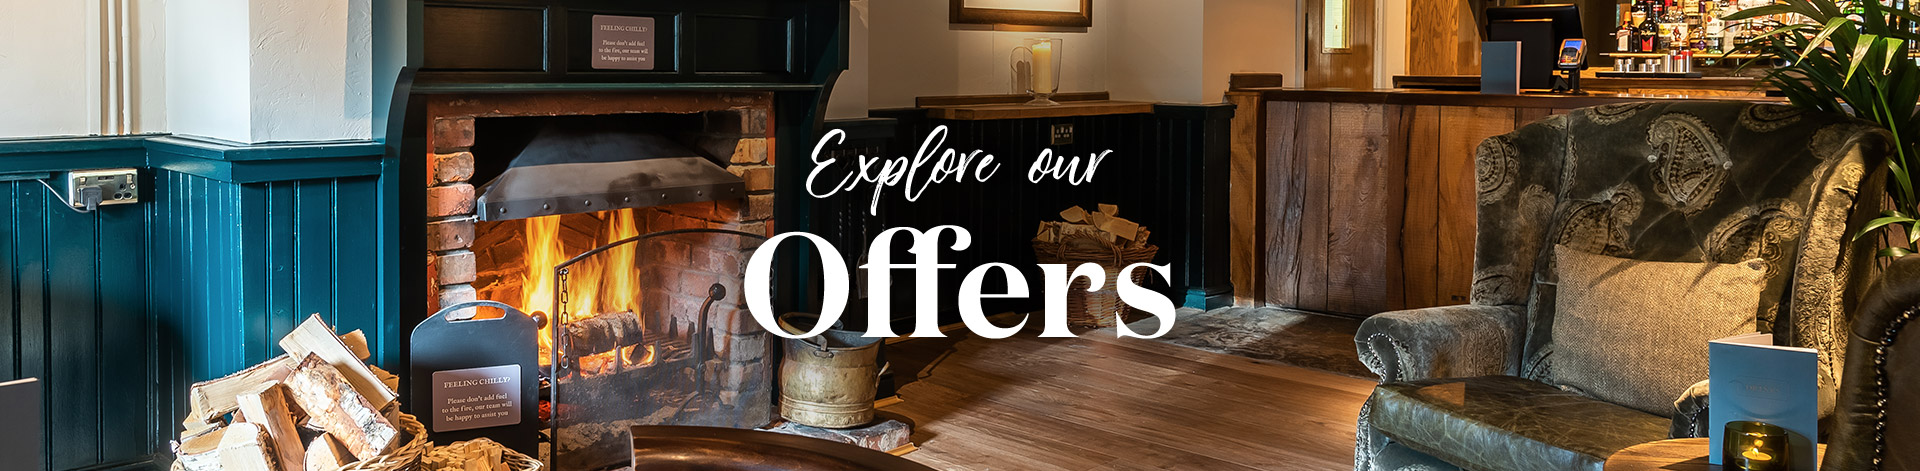 Our latest offers at The Fox Den